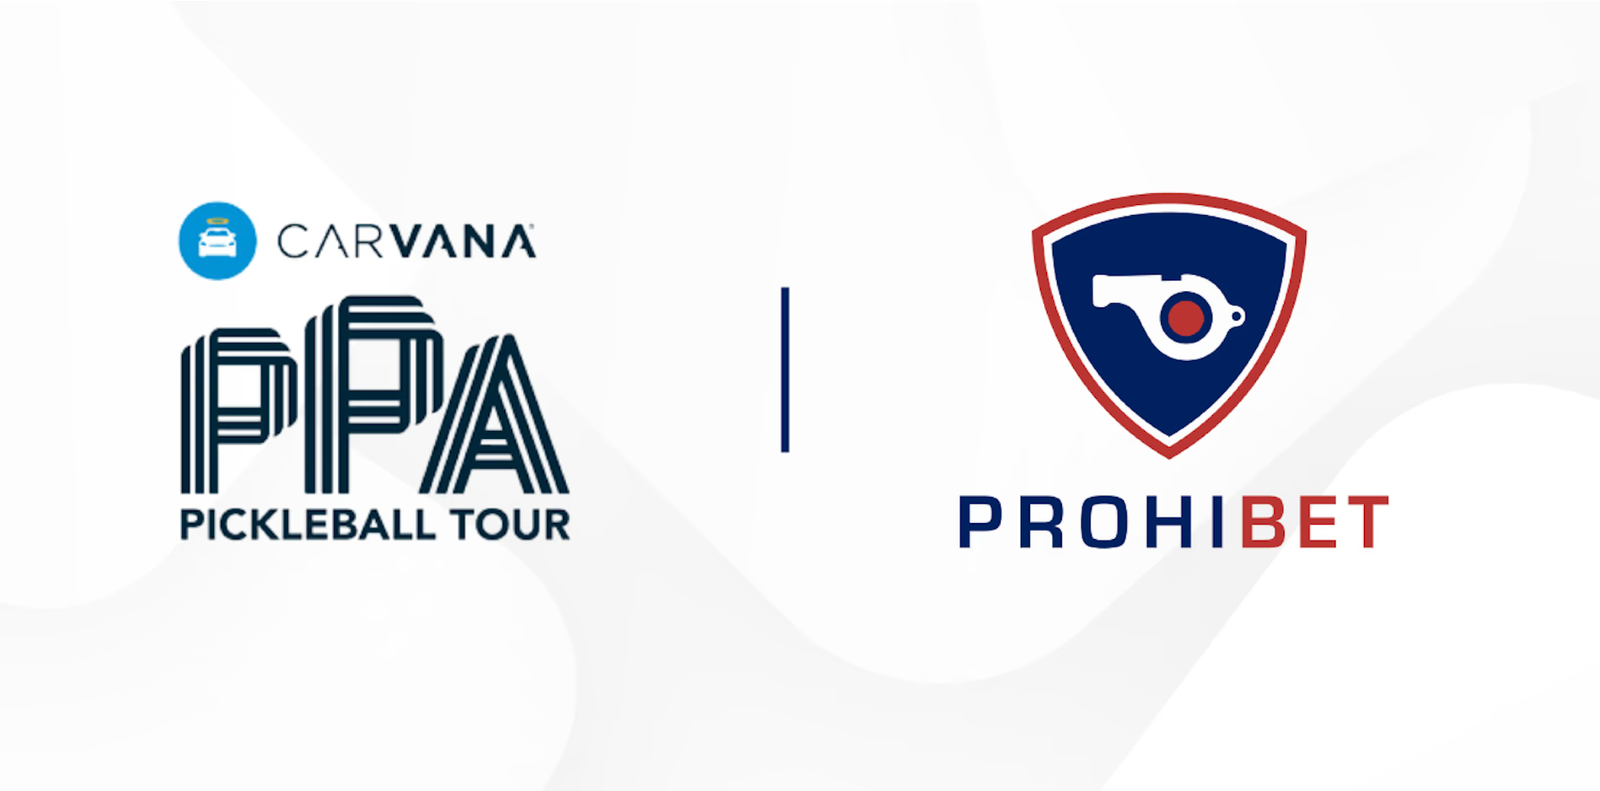 PPA Tour Takes Another Step Toward Betting, Partners with Sports Integrity Platform